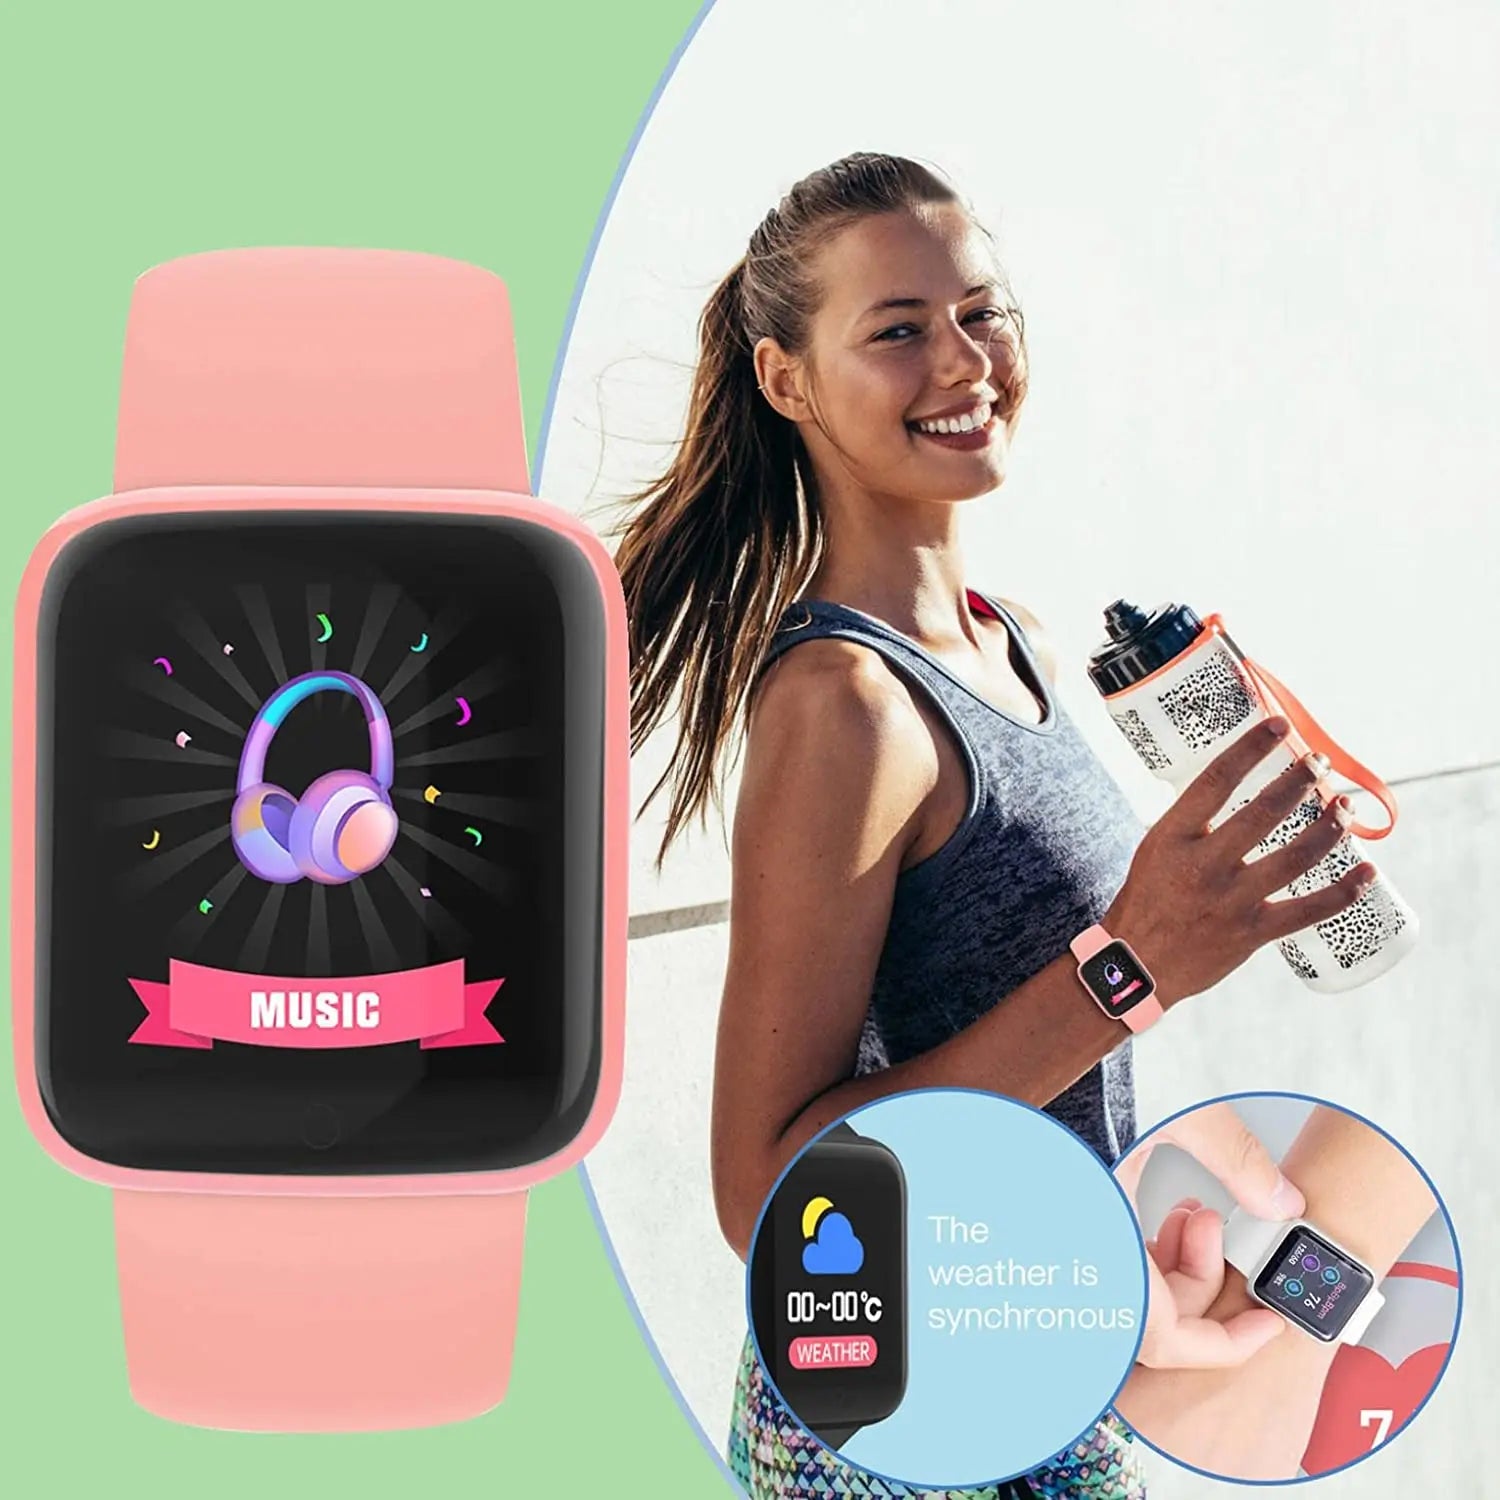 Smart Watch with Heart Rate Monitoring, Blood Pressure Band, Sleep Monitor and Fitness Tracker - Smart Watch Fun